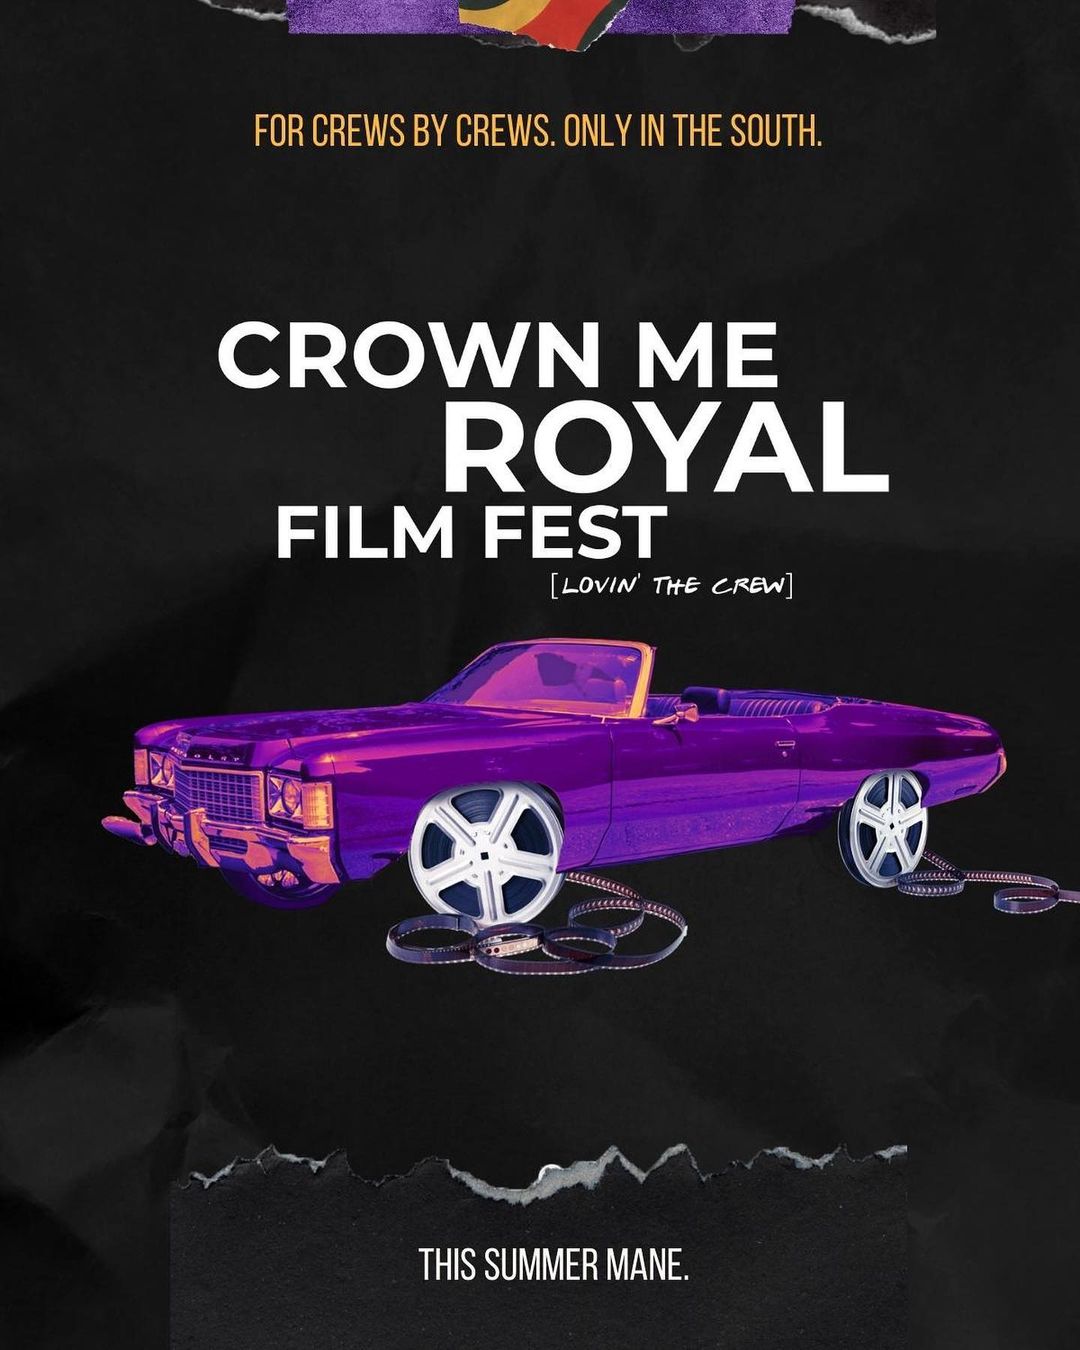 Crown me royal film fest poster for Movie Nights in Memphis.